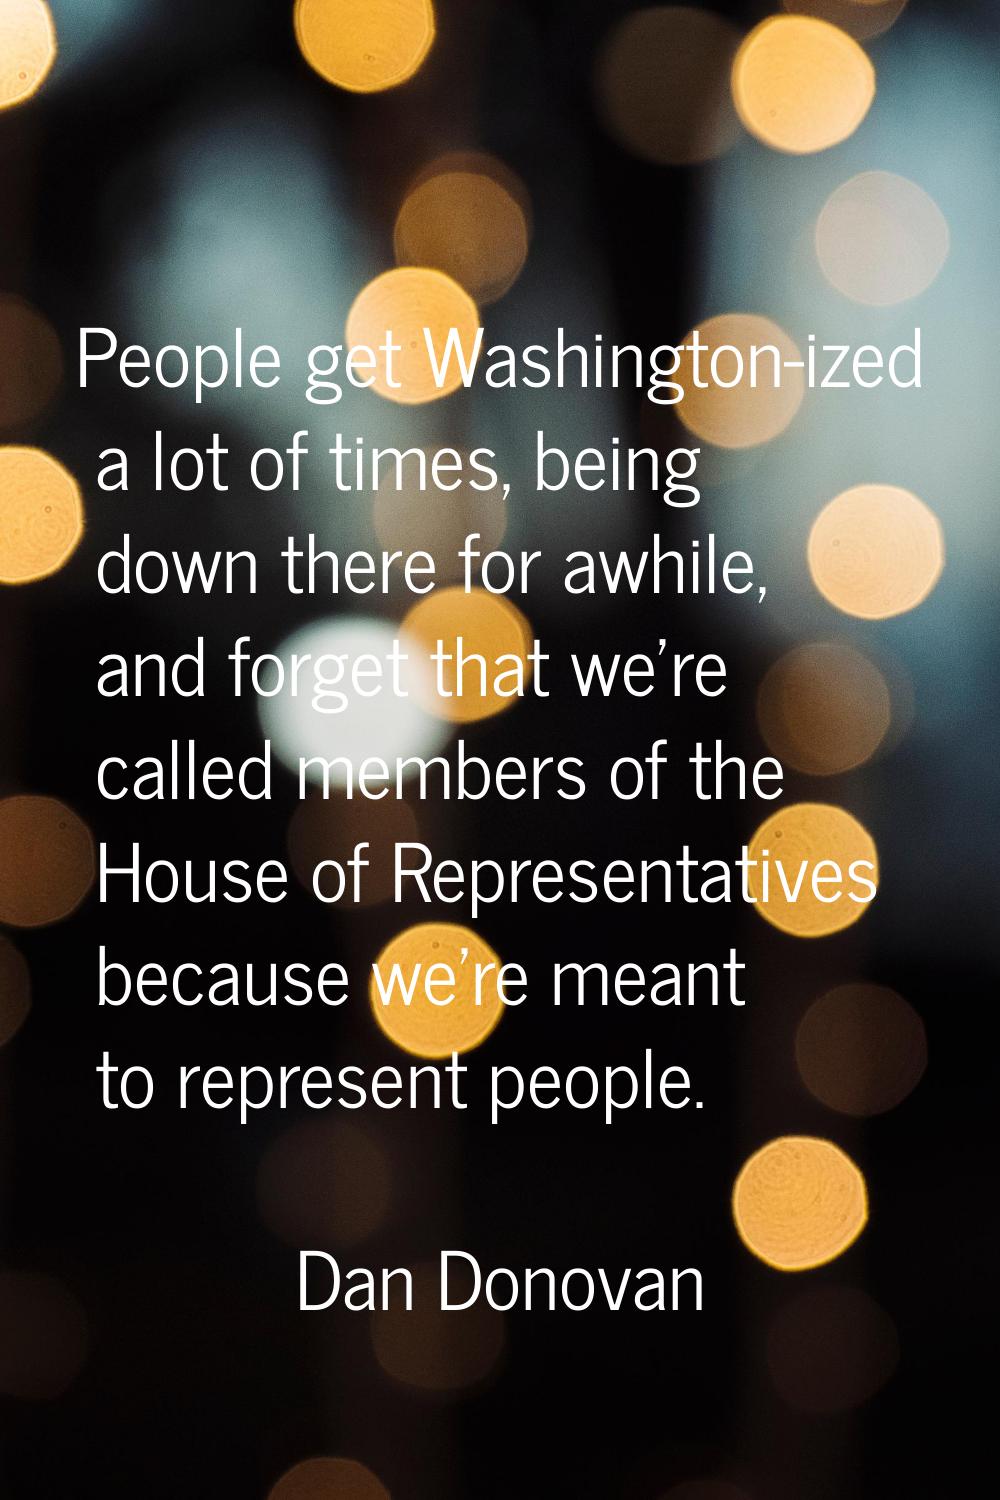 People get Washington-ized a lot of times, being down there for awhile, and forget that we're calle